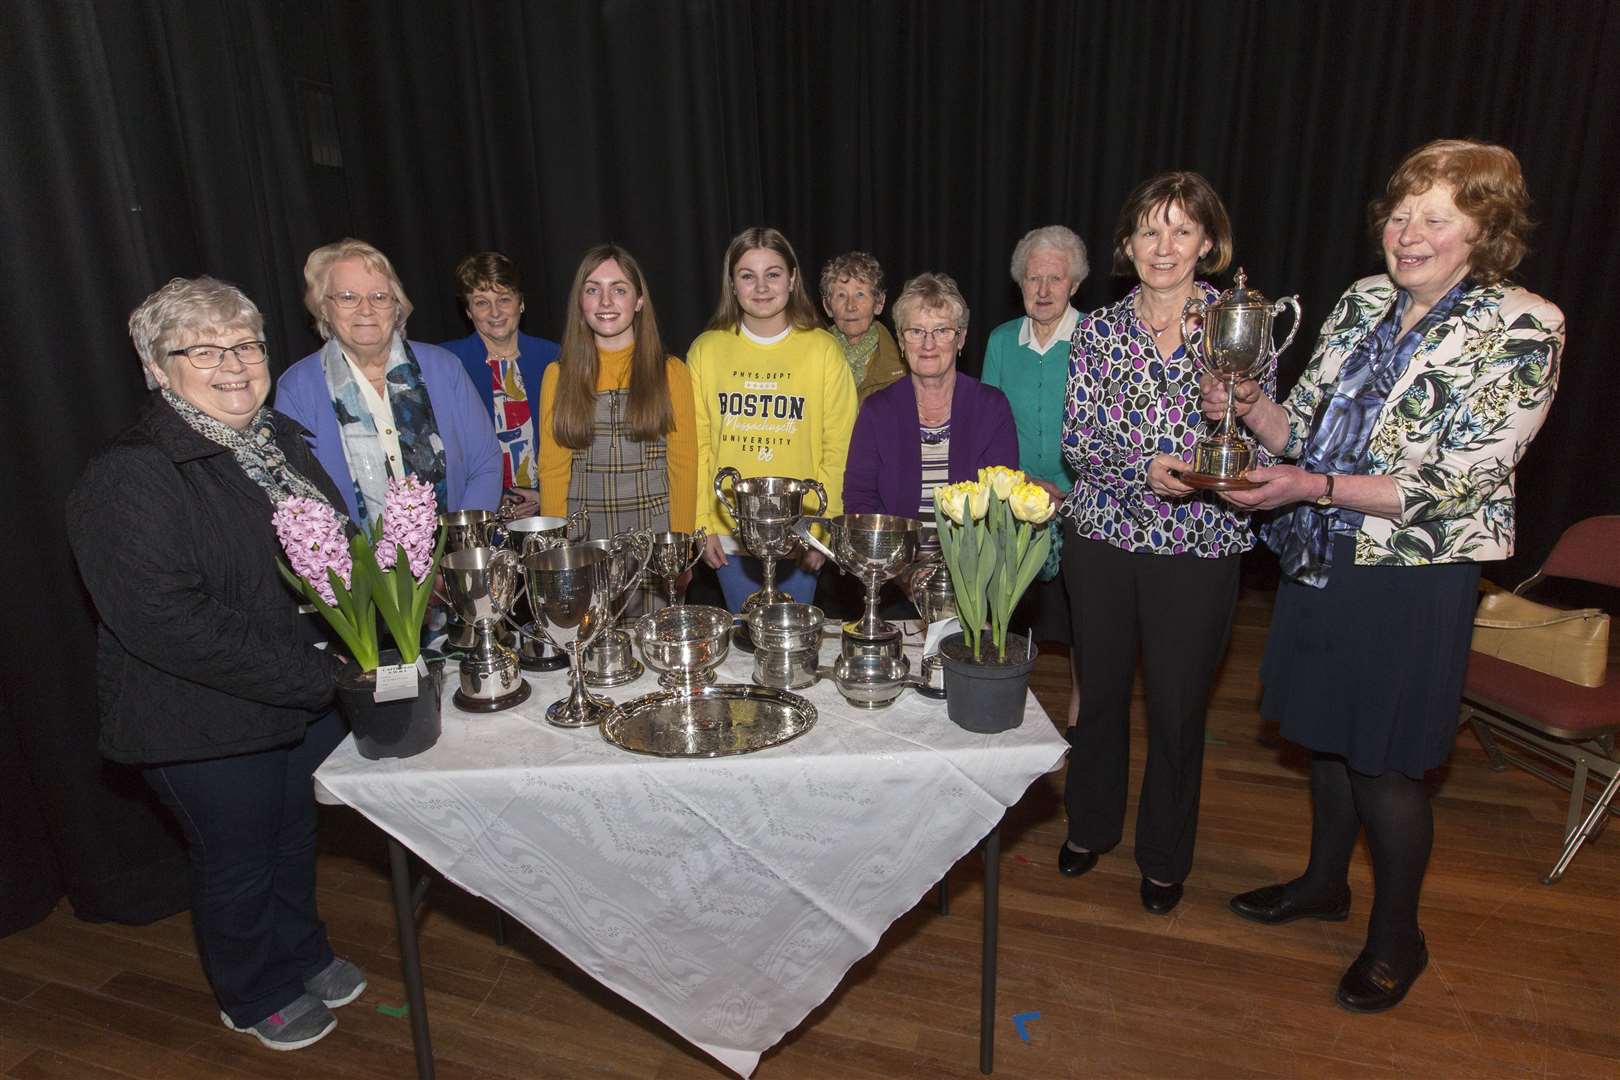 Islay MacLeod (right) presents Carol Grant of Latheron SWI with the trophy for best exhibit during the East of Caithness SWI Bulb Show in Wick Assembly Rooms. Looking on are other SWI members who collected trophies, either in their own right or on behalf of their institute. They are (from left) Marion Gordon, Thrumster; Elizabeth Smith, Lybster; Jeanette Coghill, juniors Mirissa Efemey and Iona Simpson, all Killimster; Margaret Manson, Thrumster; Margaret Murray, Killimster; and Sheila McLeod, Lybster. Picture: Robert MacDonald / Northern Studios